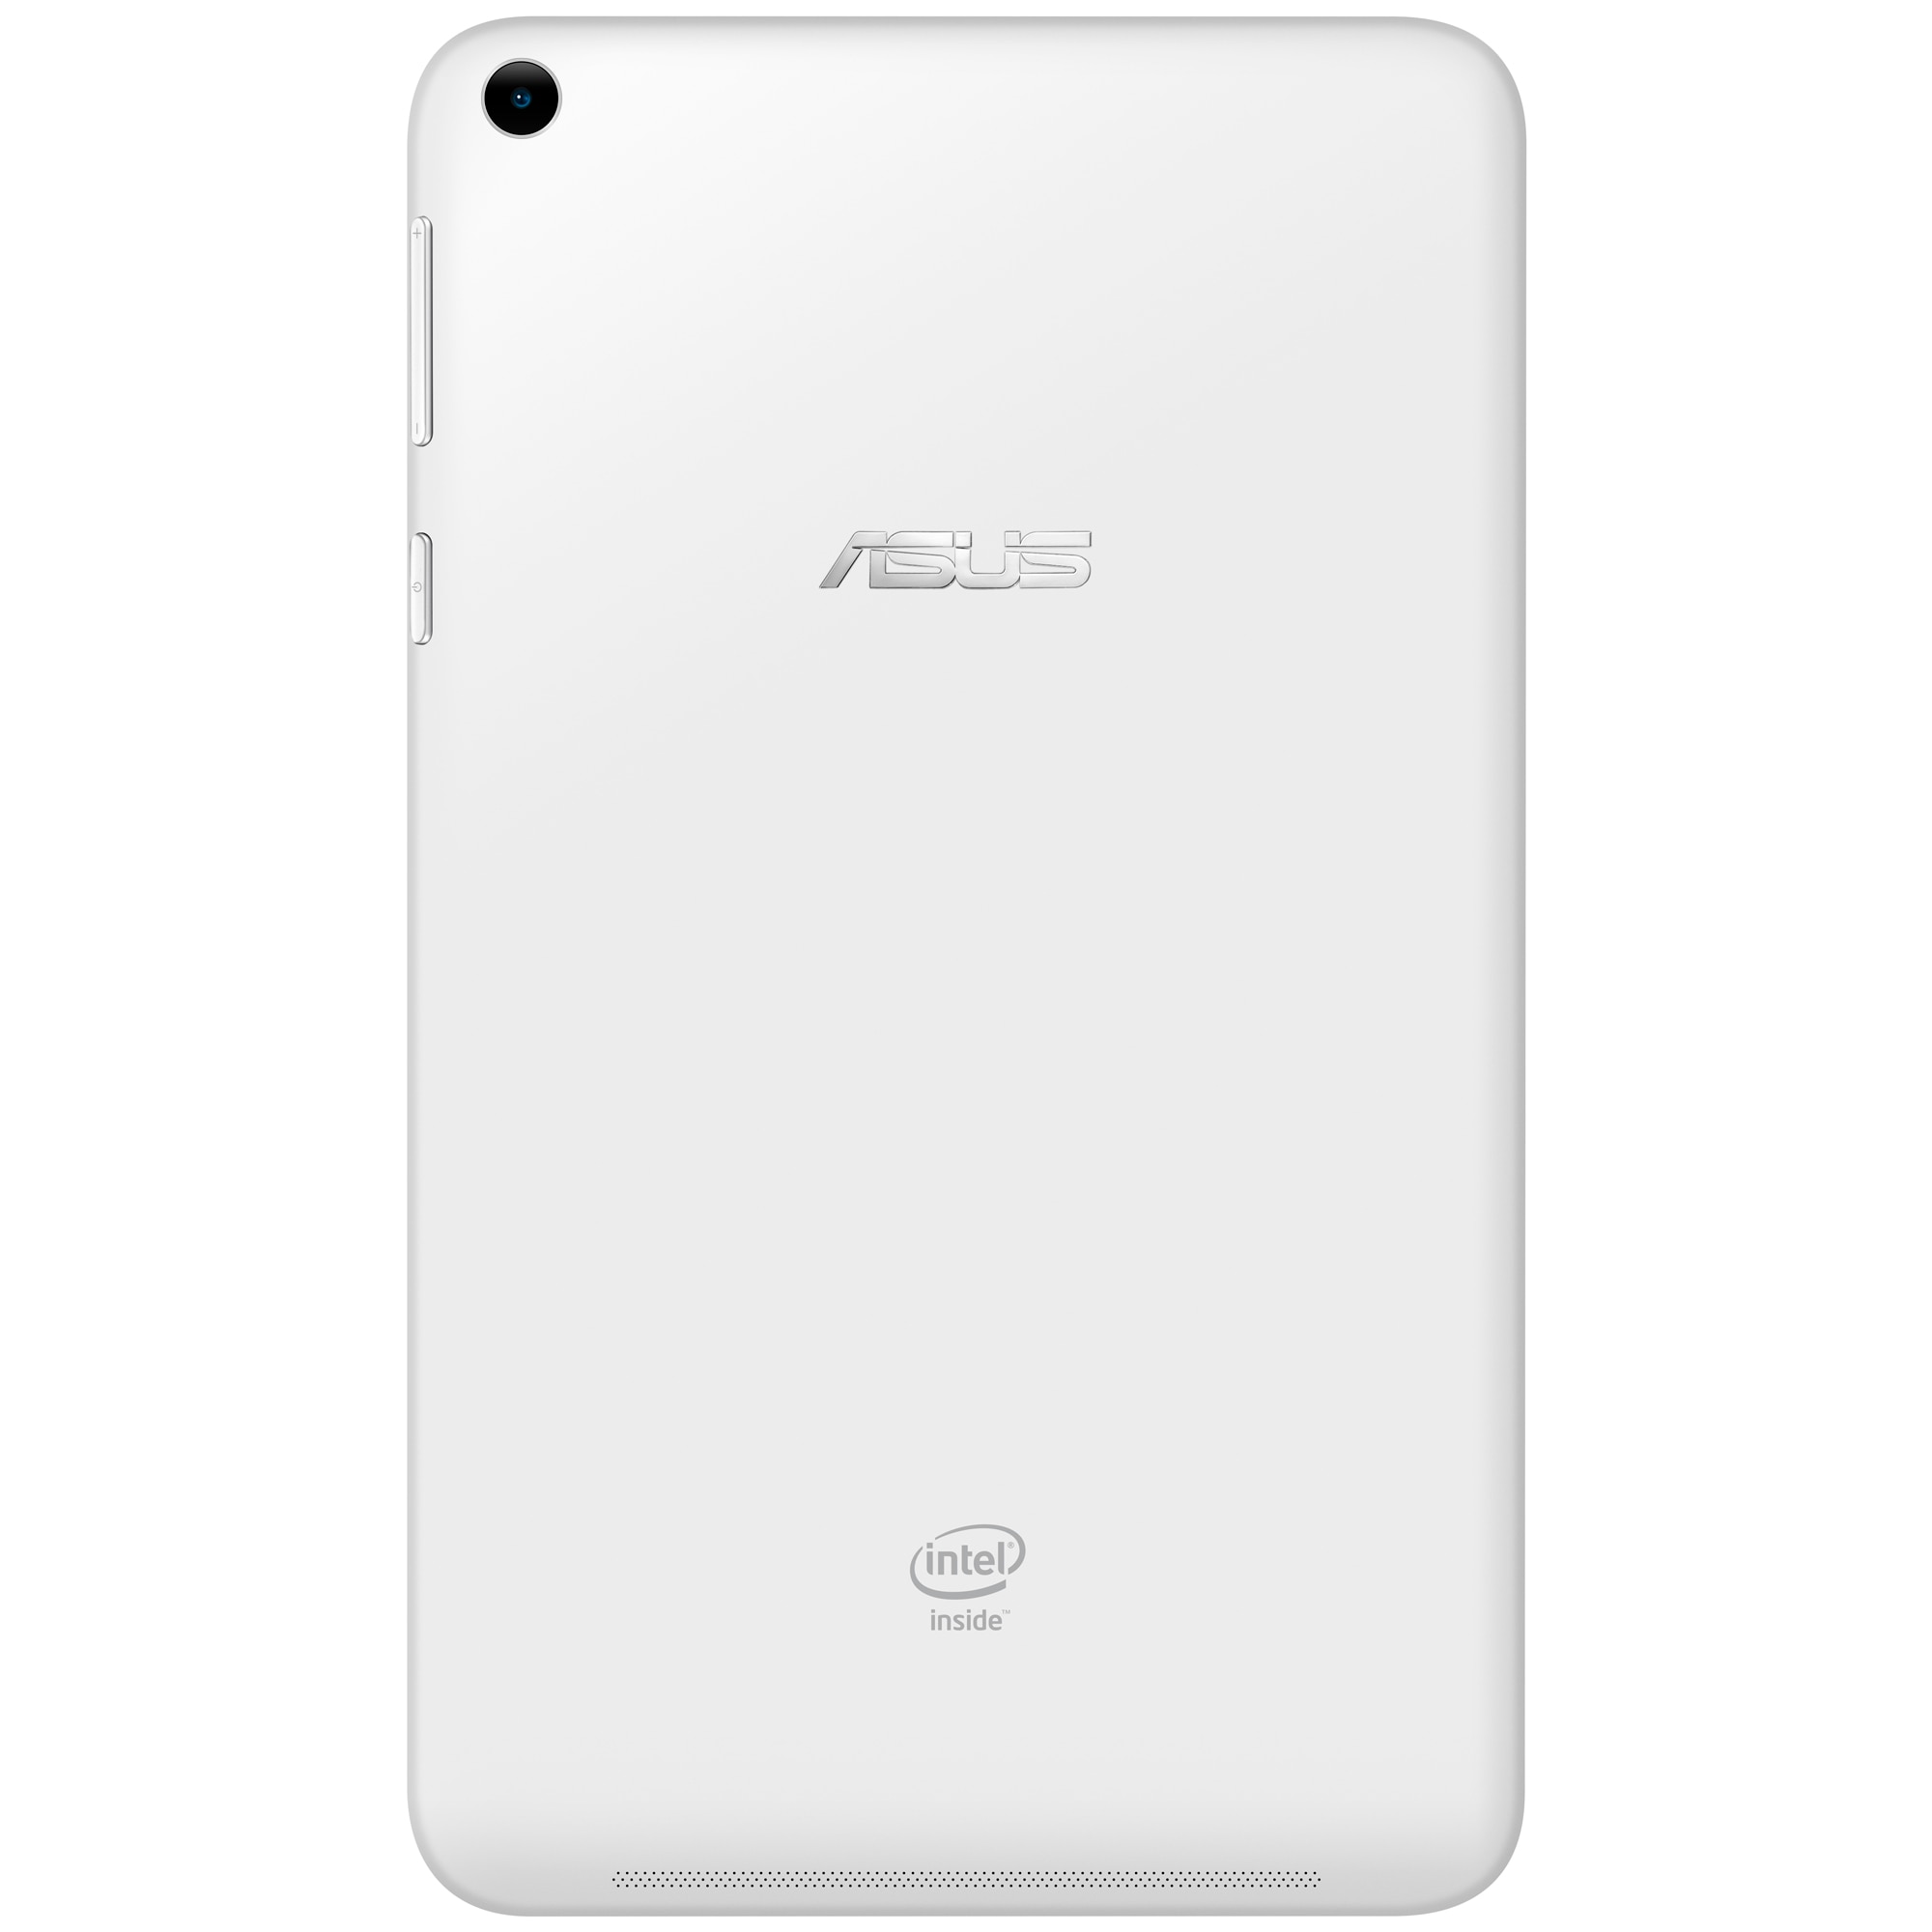 Circumference Nonsense To meditation Tableta ASUS MeMO Pad 8 ME181CX-1B017A cu procesor Intel® Quad-Core Z3745  1.33GHz, 8", 1GB DDR2, 8GB, Wi-Fi, Bluetooth 4.0, GPS, Android 4.4 KitKat,  White - eMAG.ro